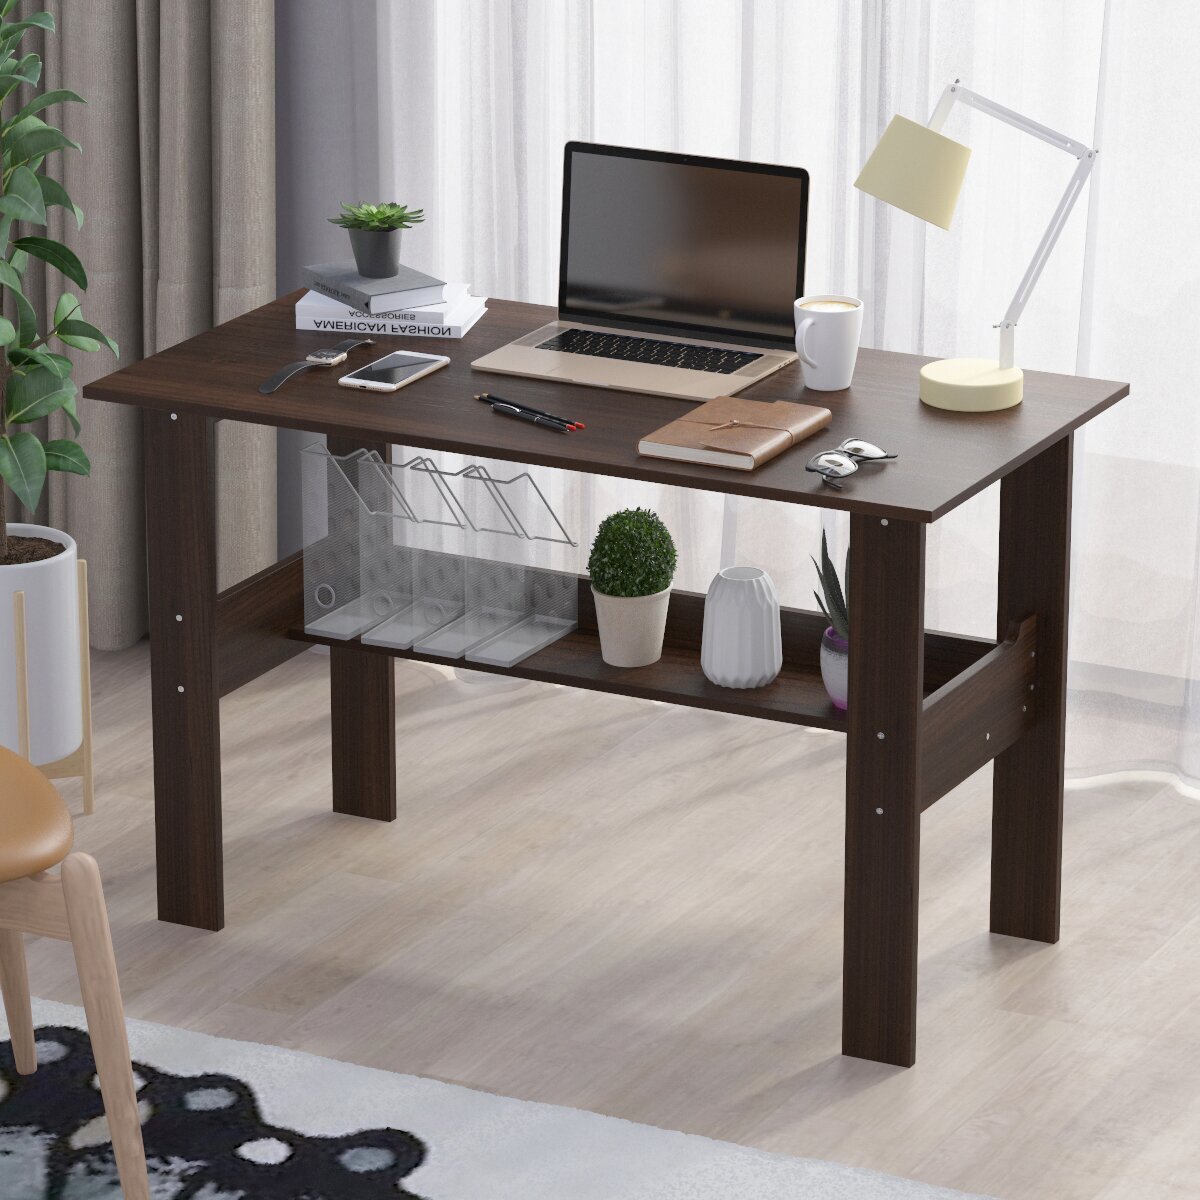 Computer table design with printer